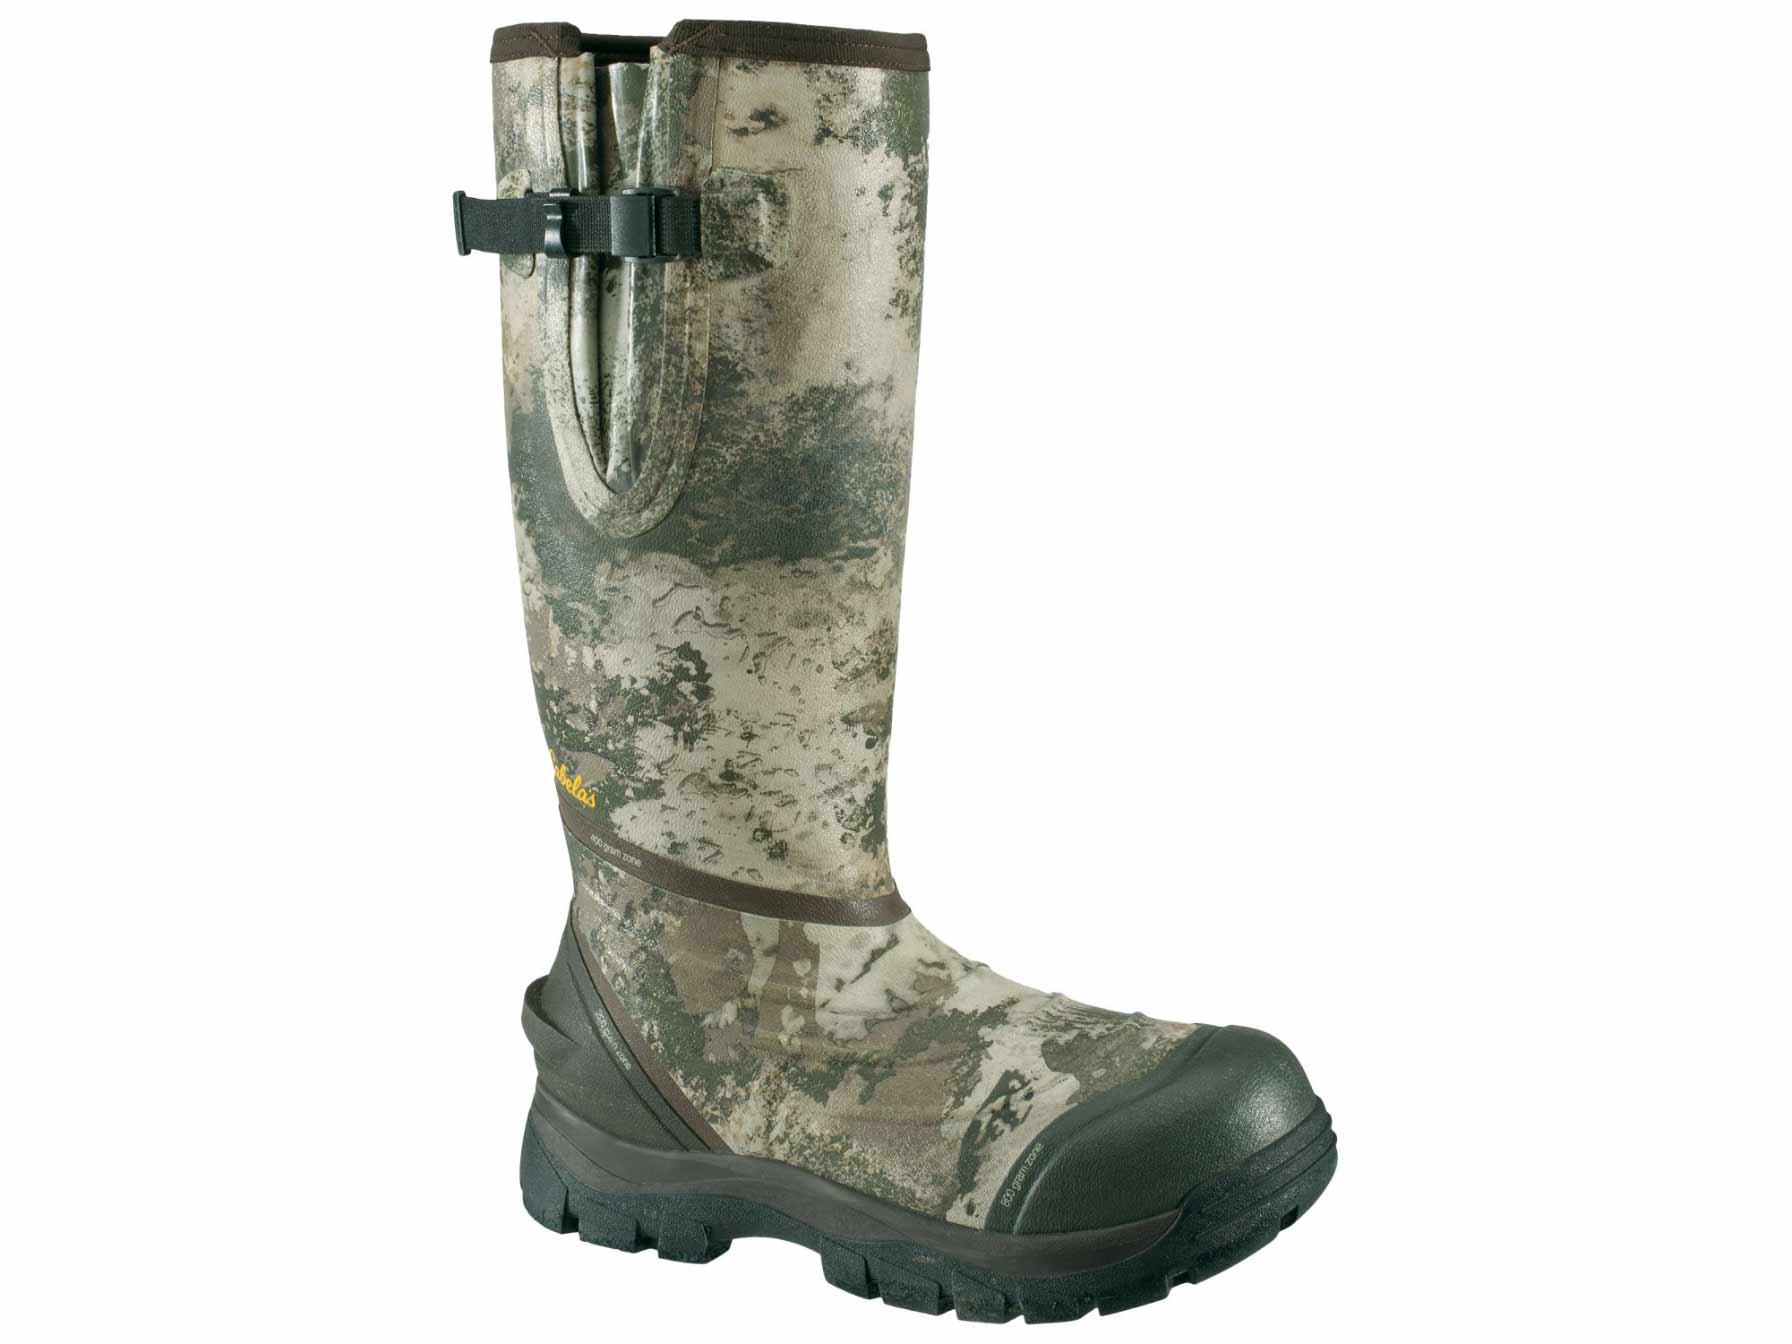 Cabela’s Zoned Comfort Trac insulated rubber hunting boots